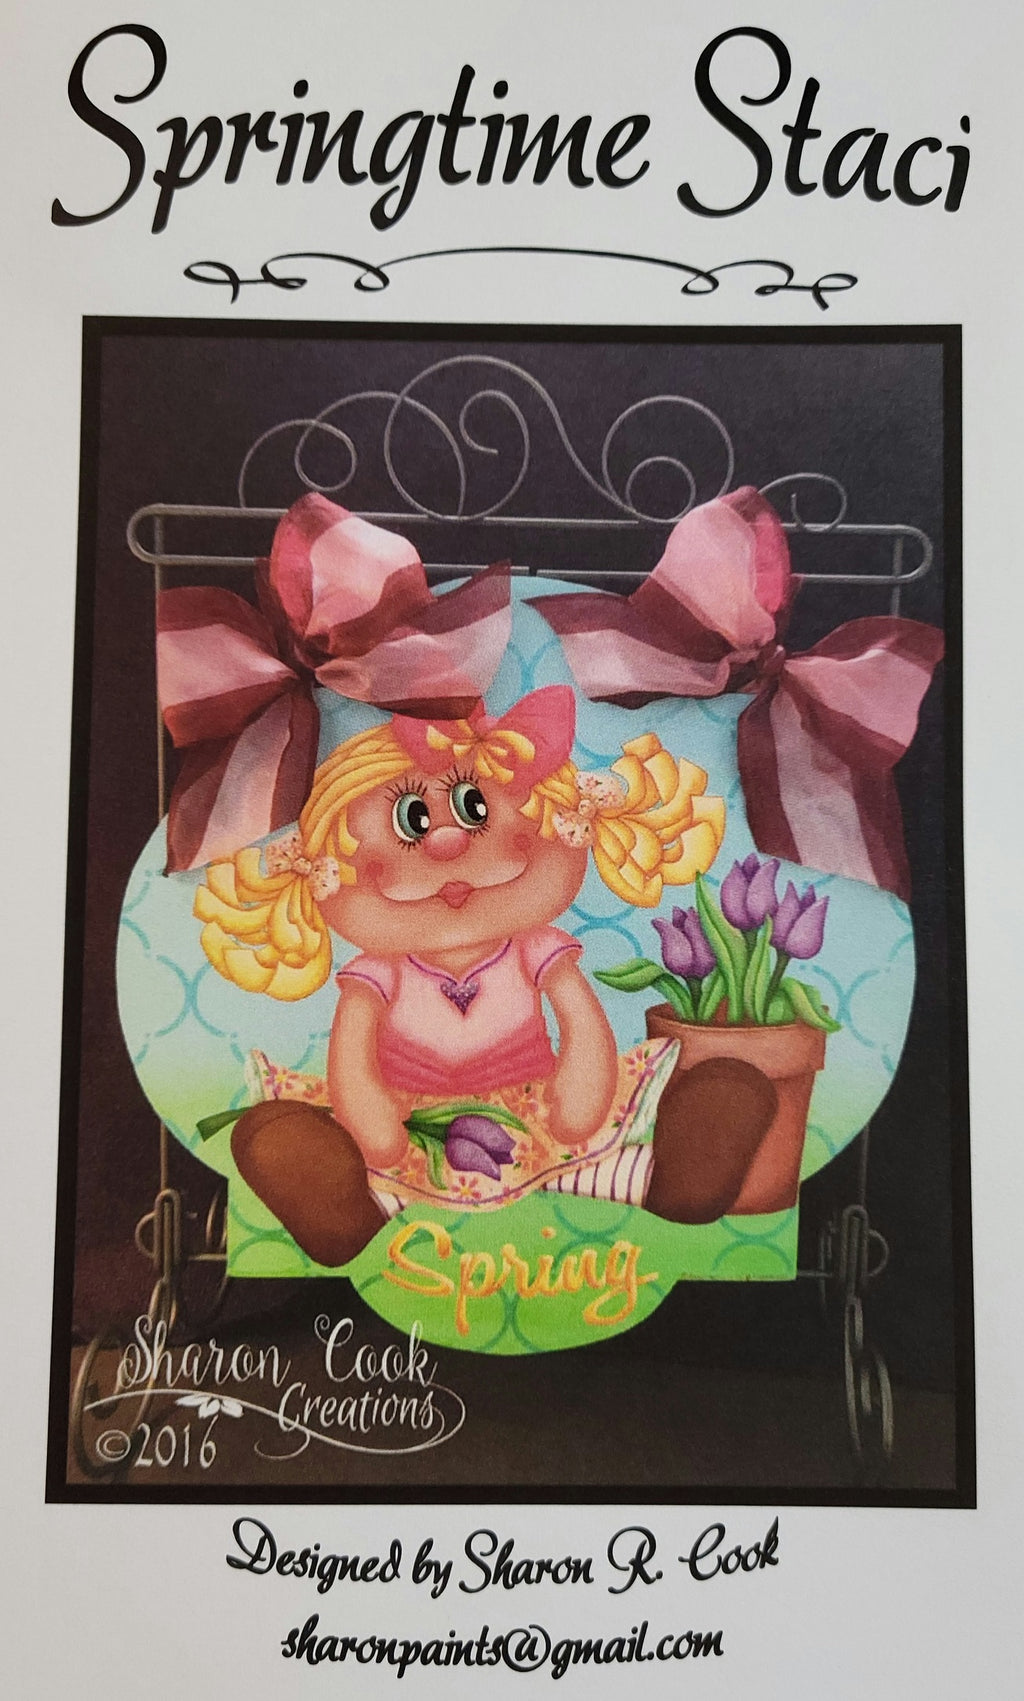 Springtime Staci packet by Sharon Cook